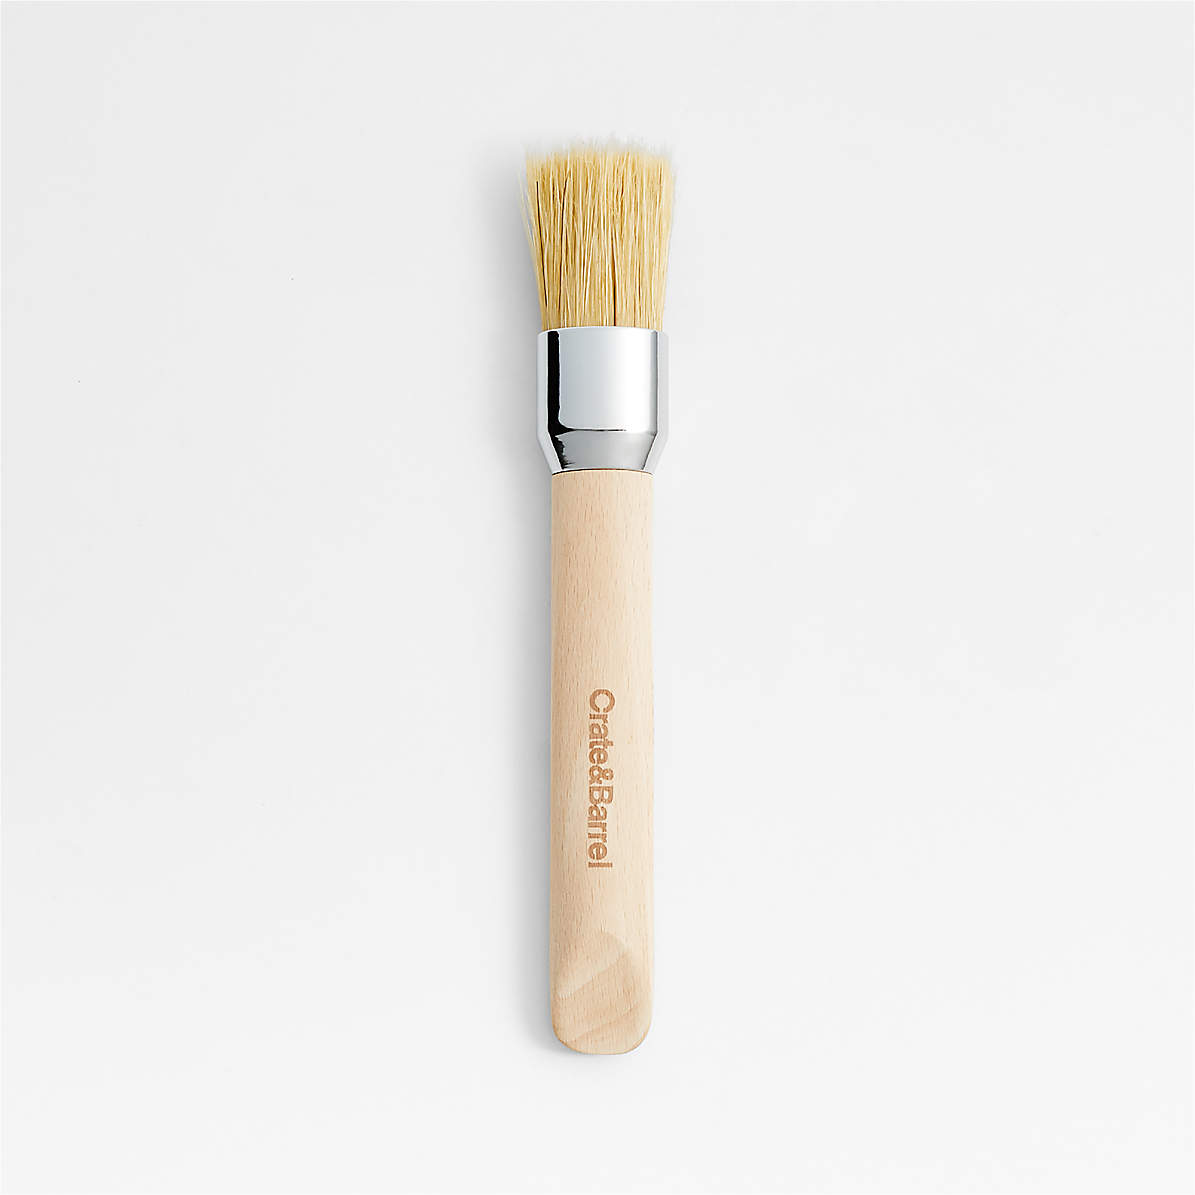 Crate & Barrel Small Pastry Brush with Beechwood Handle